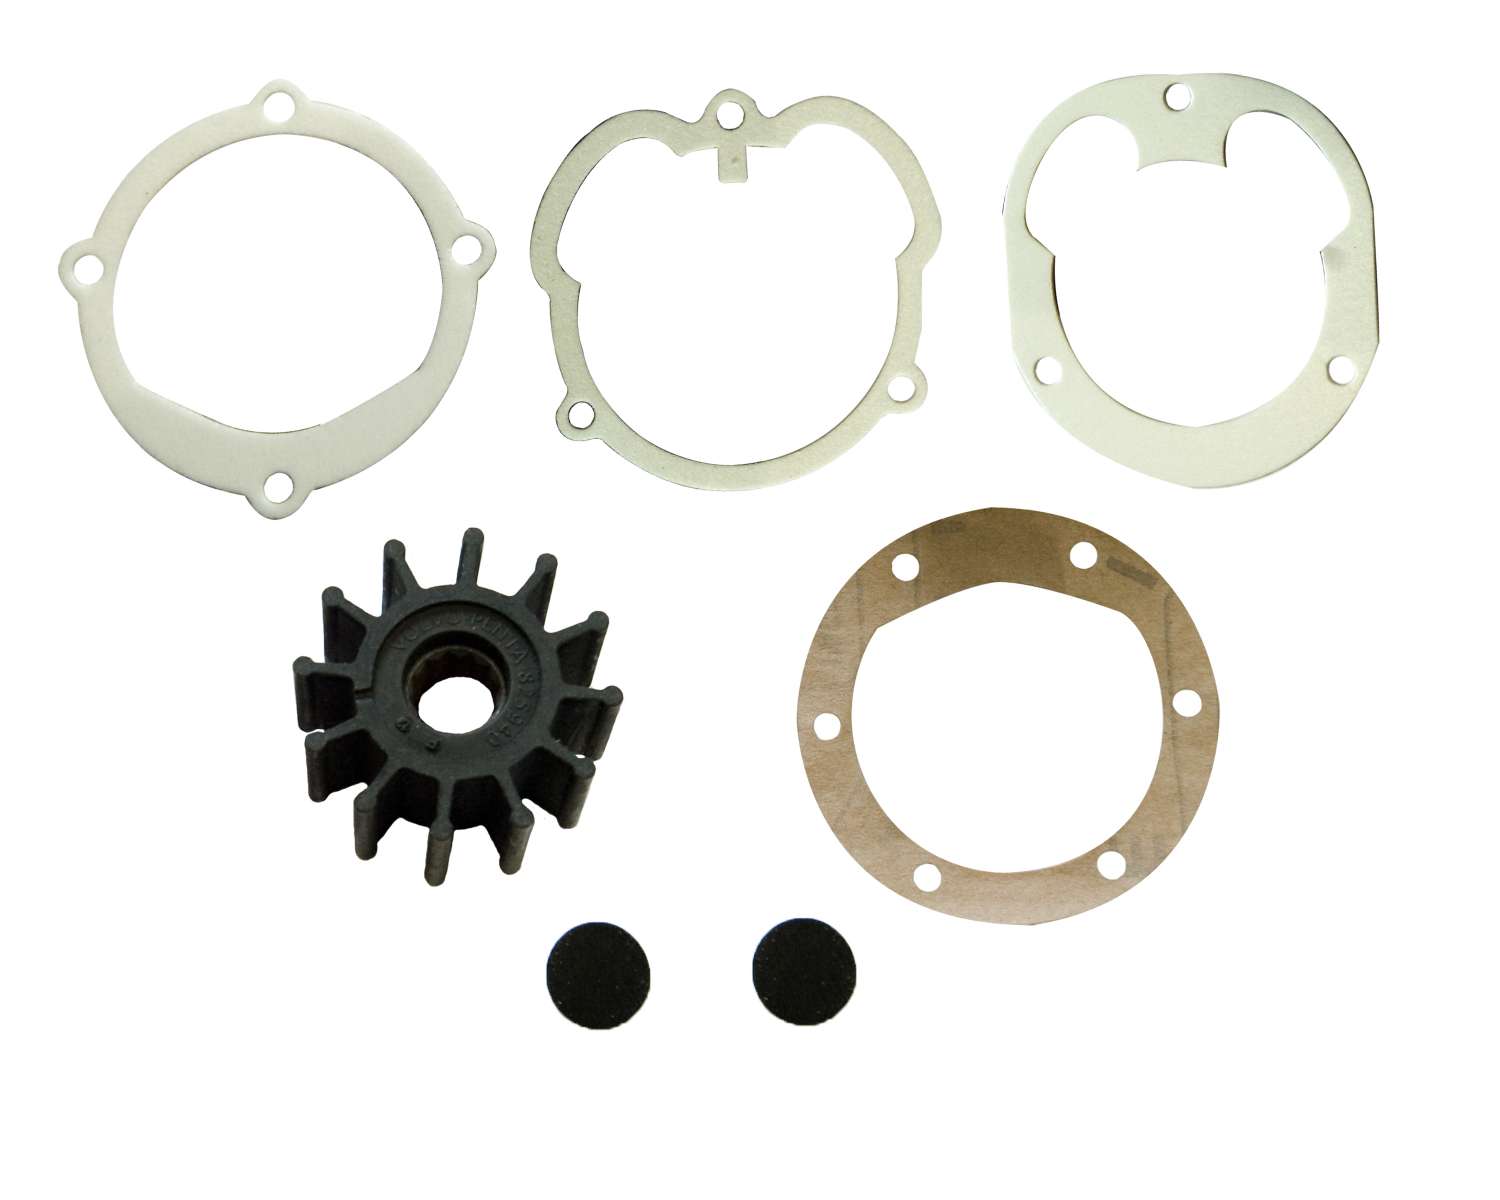 Impeller Service Kit For OMC Cobra Replaces OMC 3862281